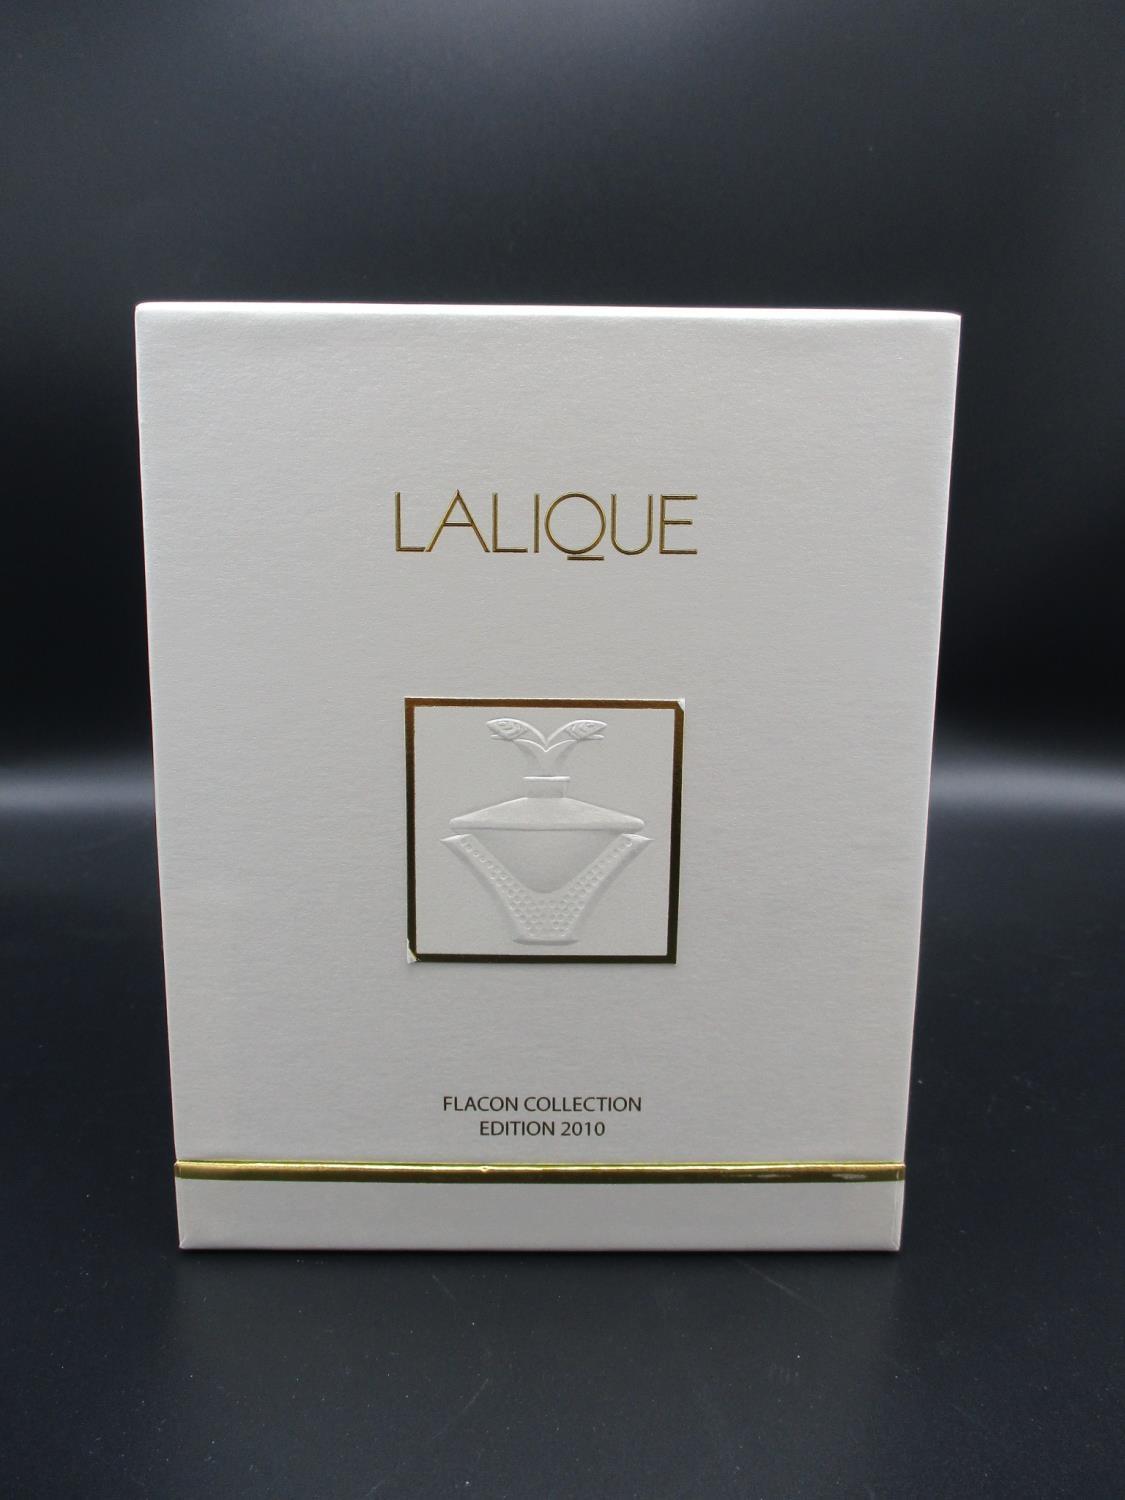 A Lalique Limited Edition perfume, 2010 Flacon Collection, 'Cascade', etched to underside Lalique - Image 2 of 5